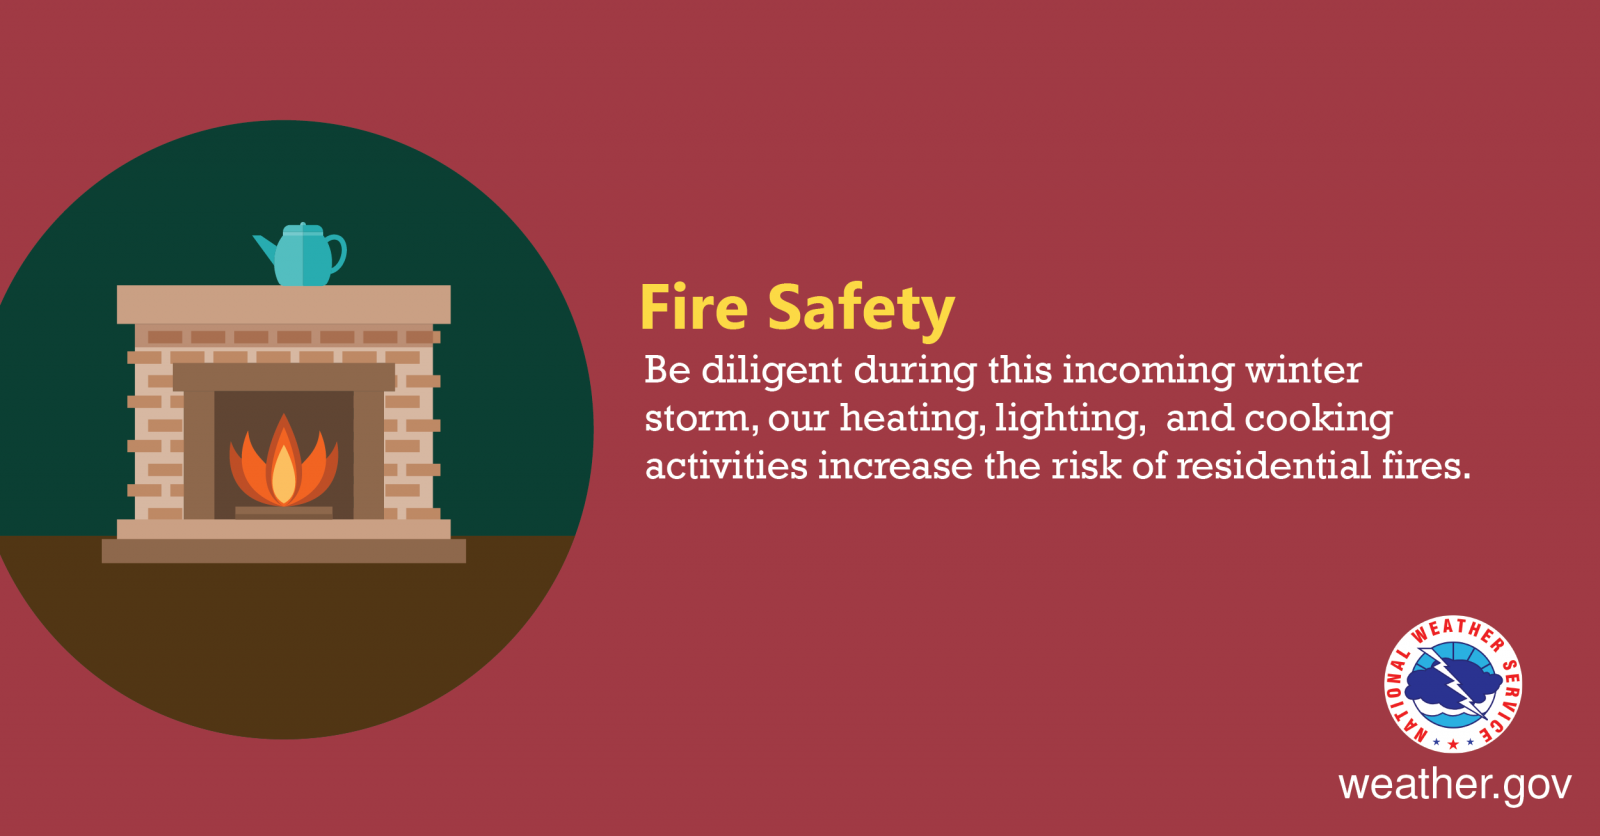 Indoor fire safety